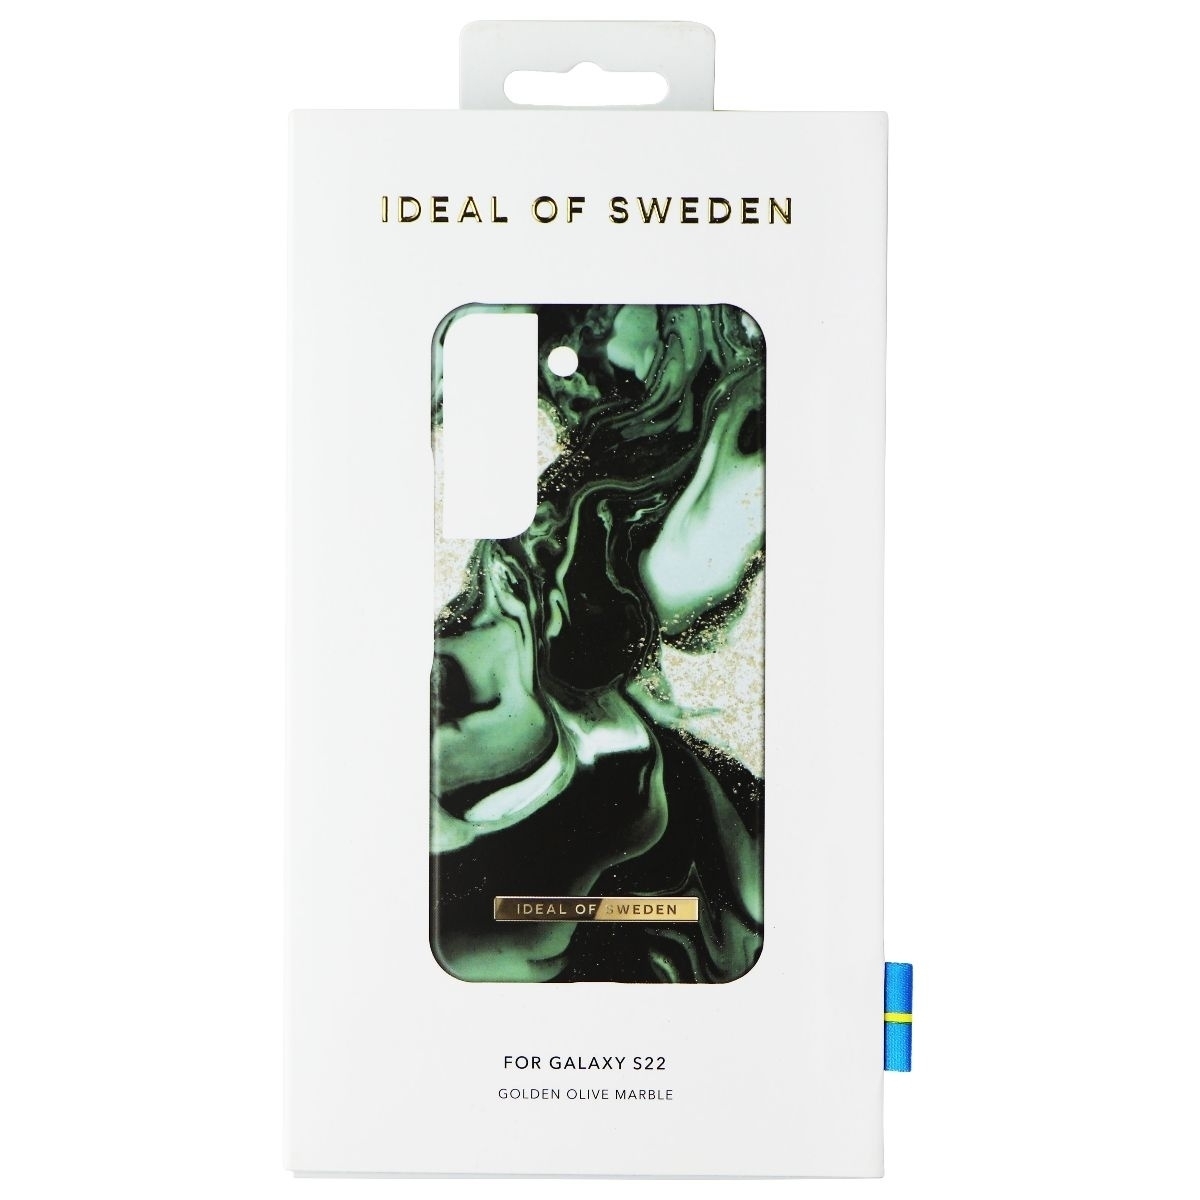 IDeal Of Sweden Printed Case For Samsung Galaxy S22 - Golden Olive Marble